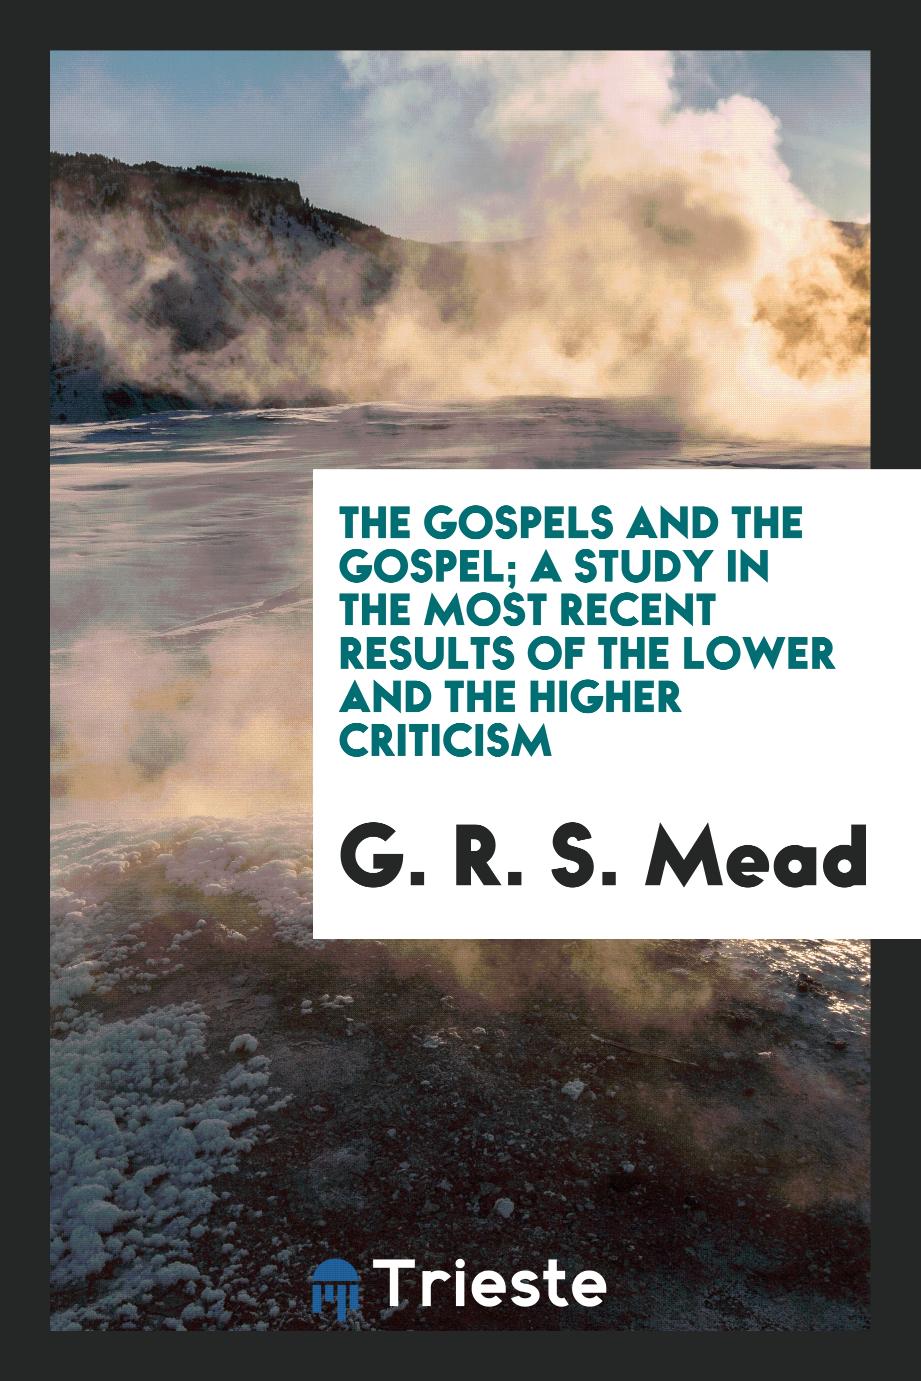 The Gospels and the Gospel; a study in the most recent results of the lower and the higher criticism